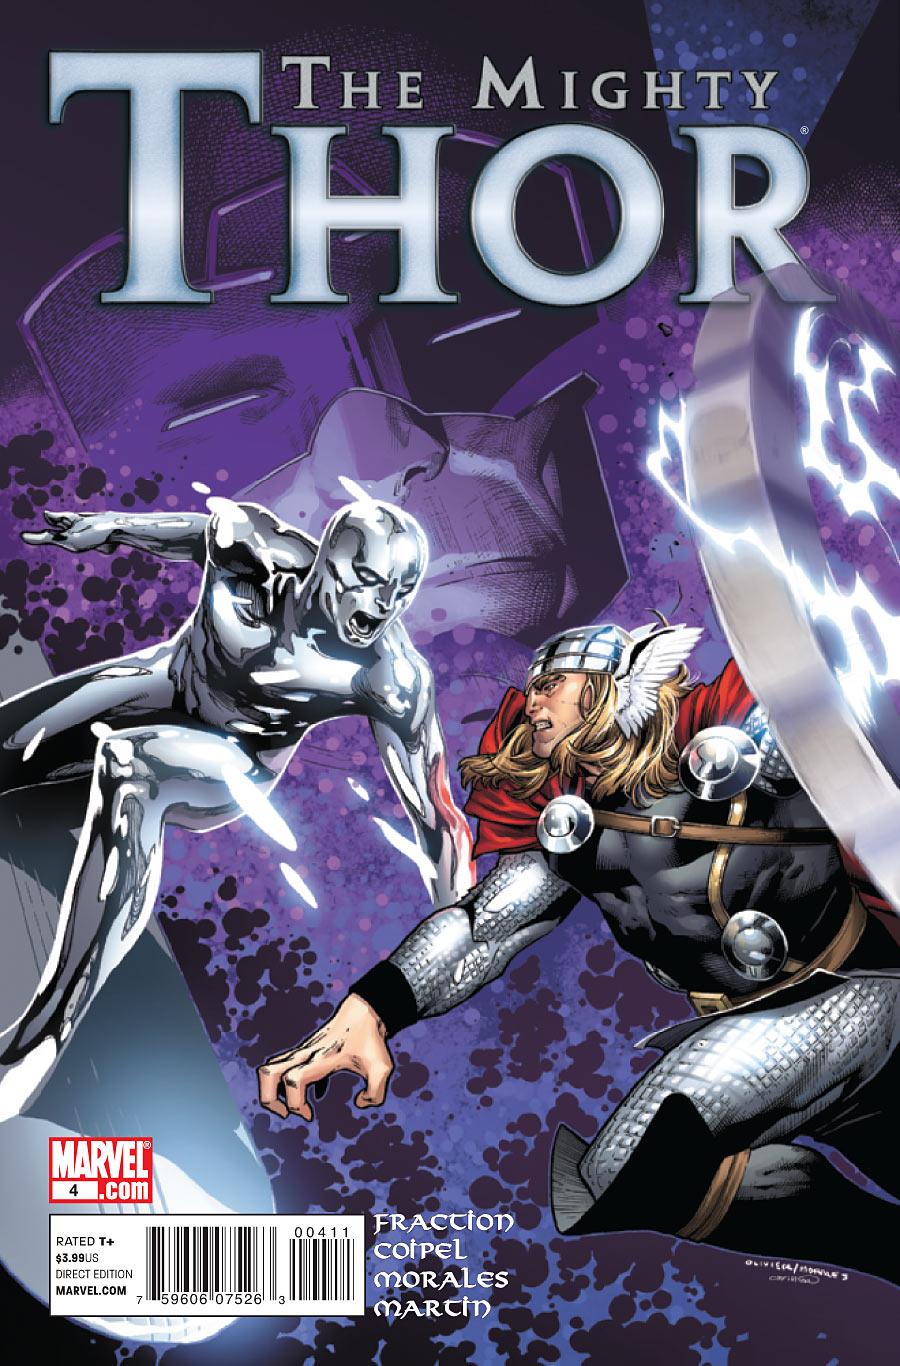 The Mighty Thor Vol. 1 #4